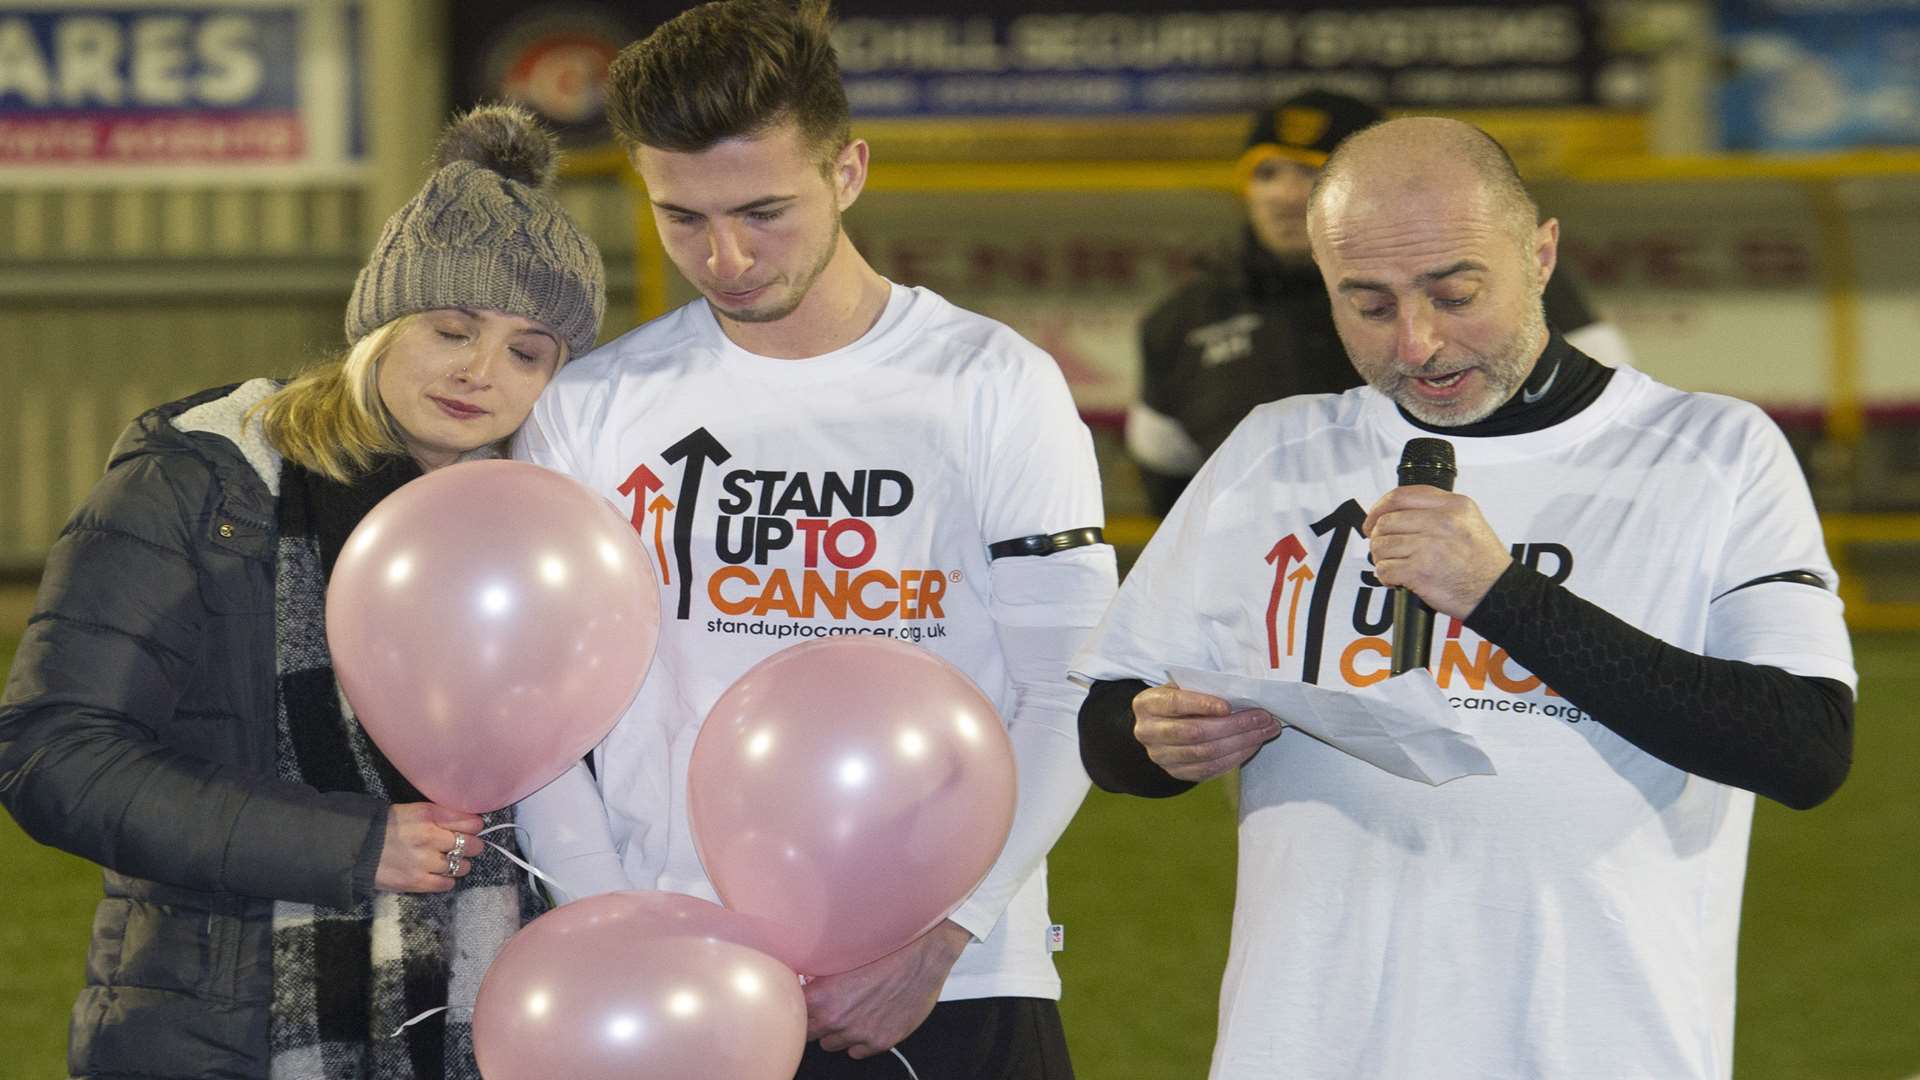 Chloe, Tom and Lee Mackelden at a charity football match in honour of Tania